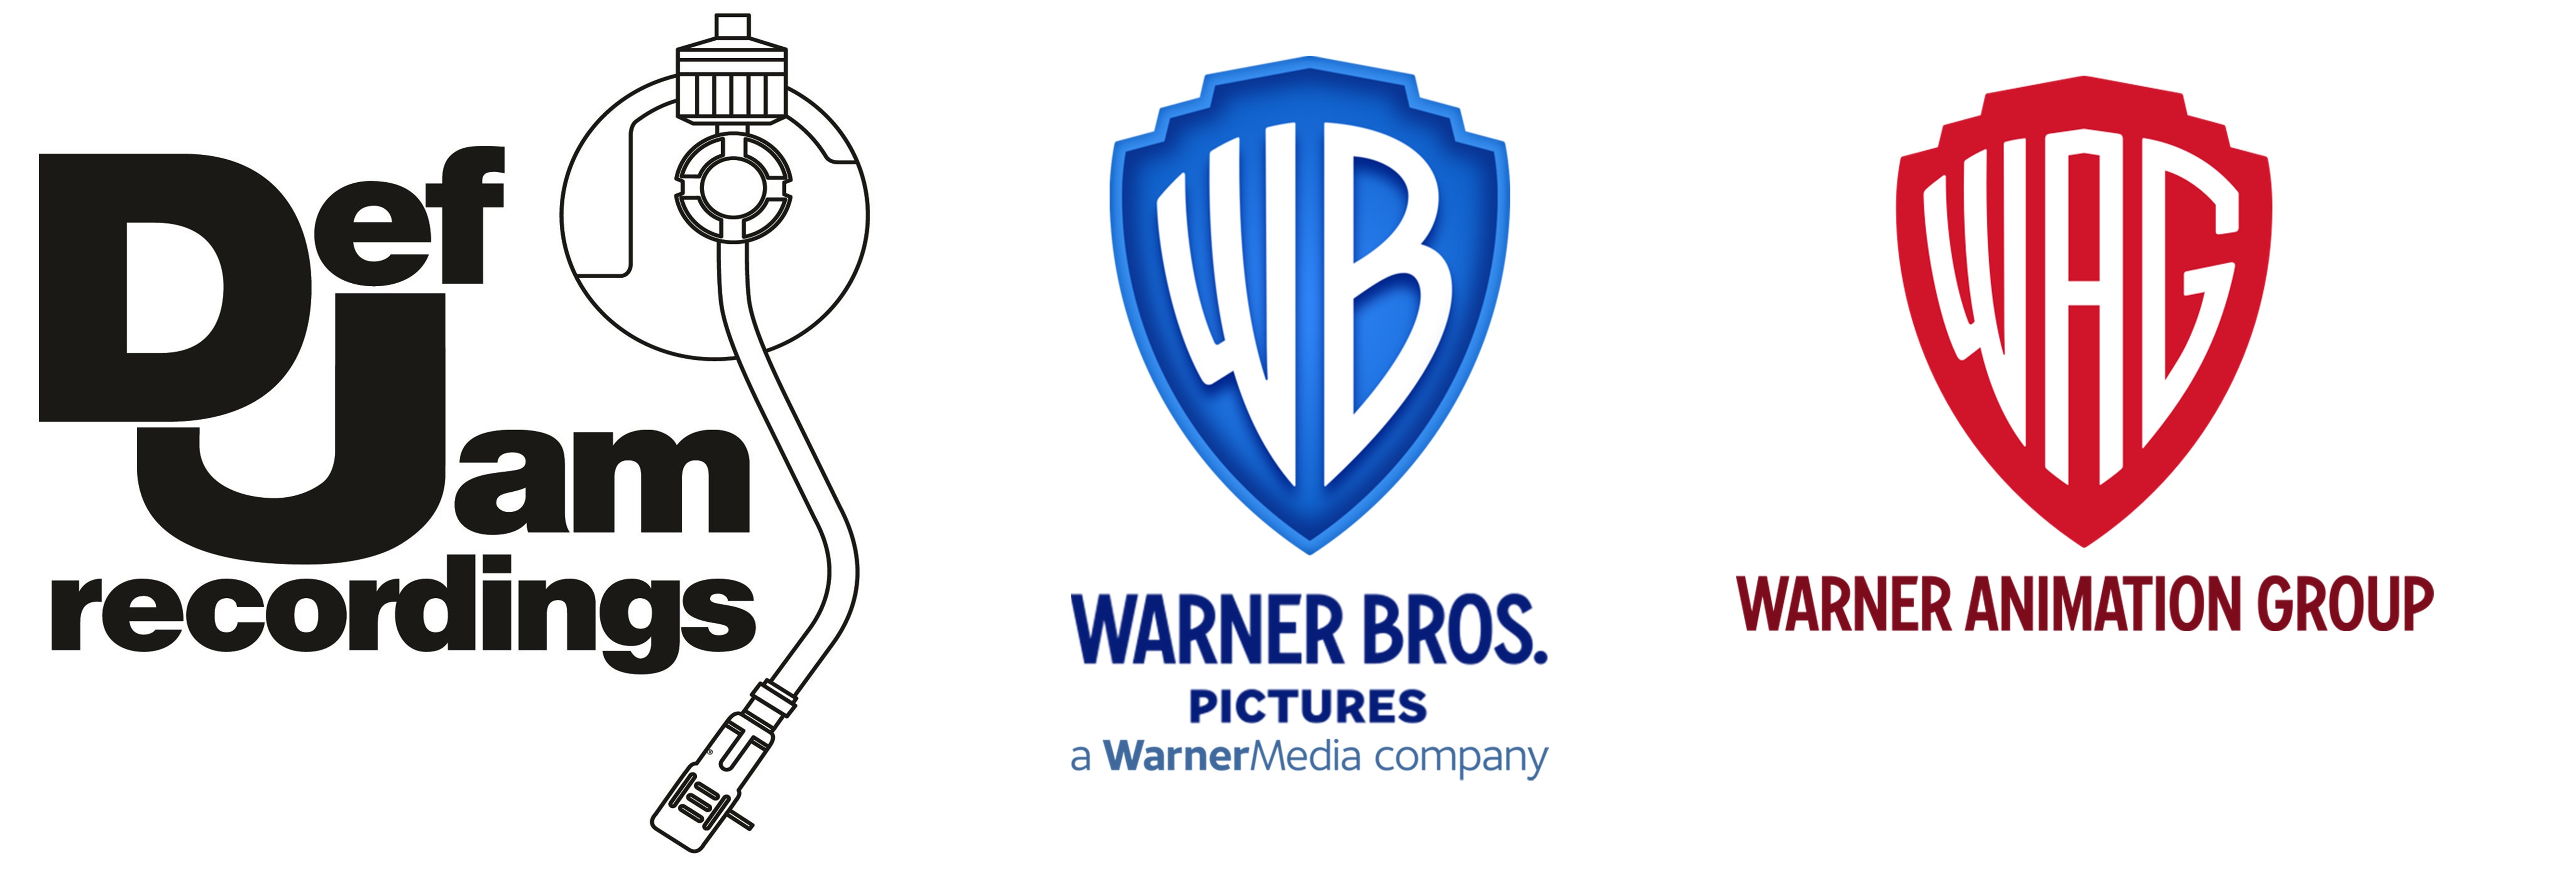 Def Jam Recordings, Warner Bros. Pictures And Warner Animation Group